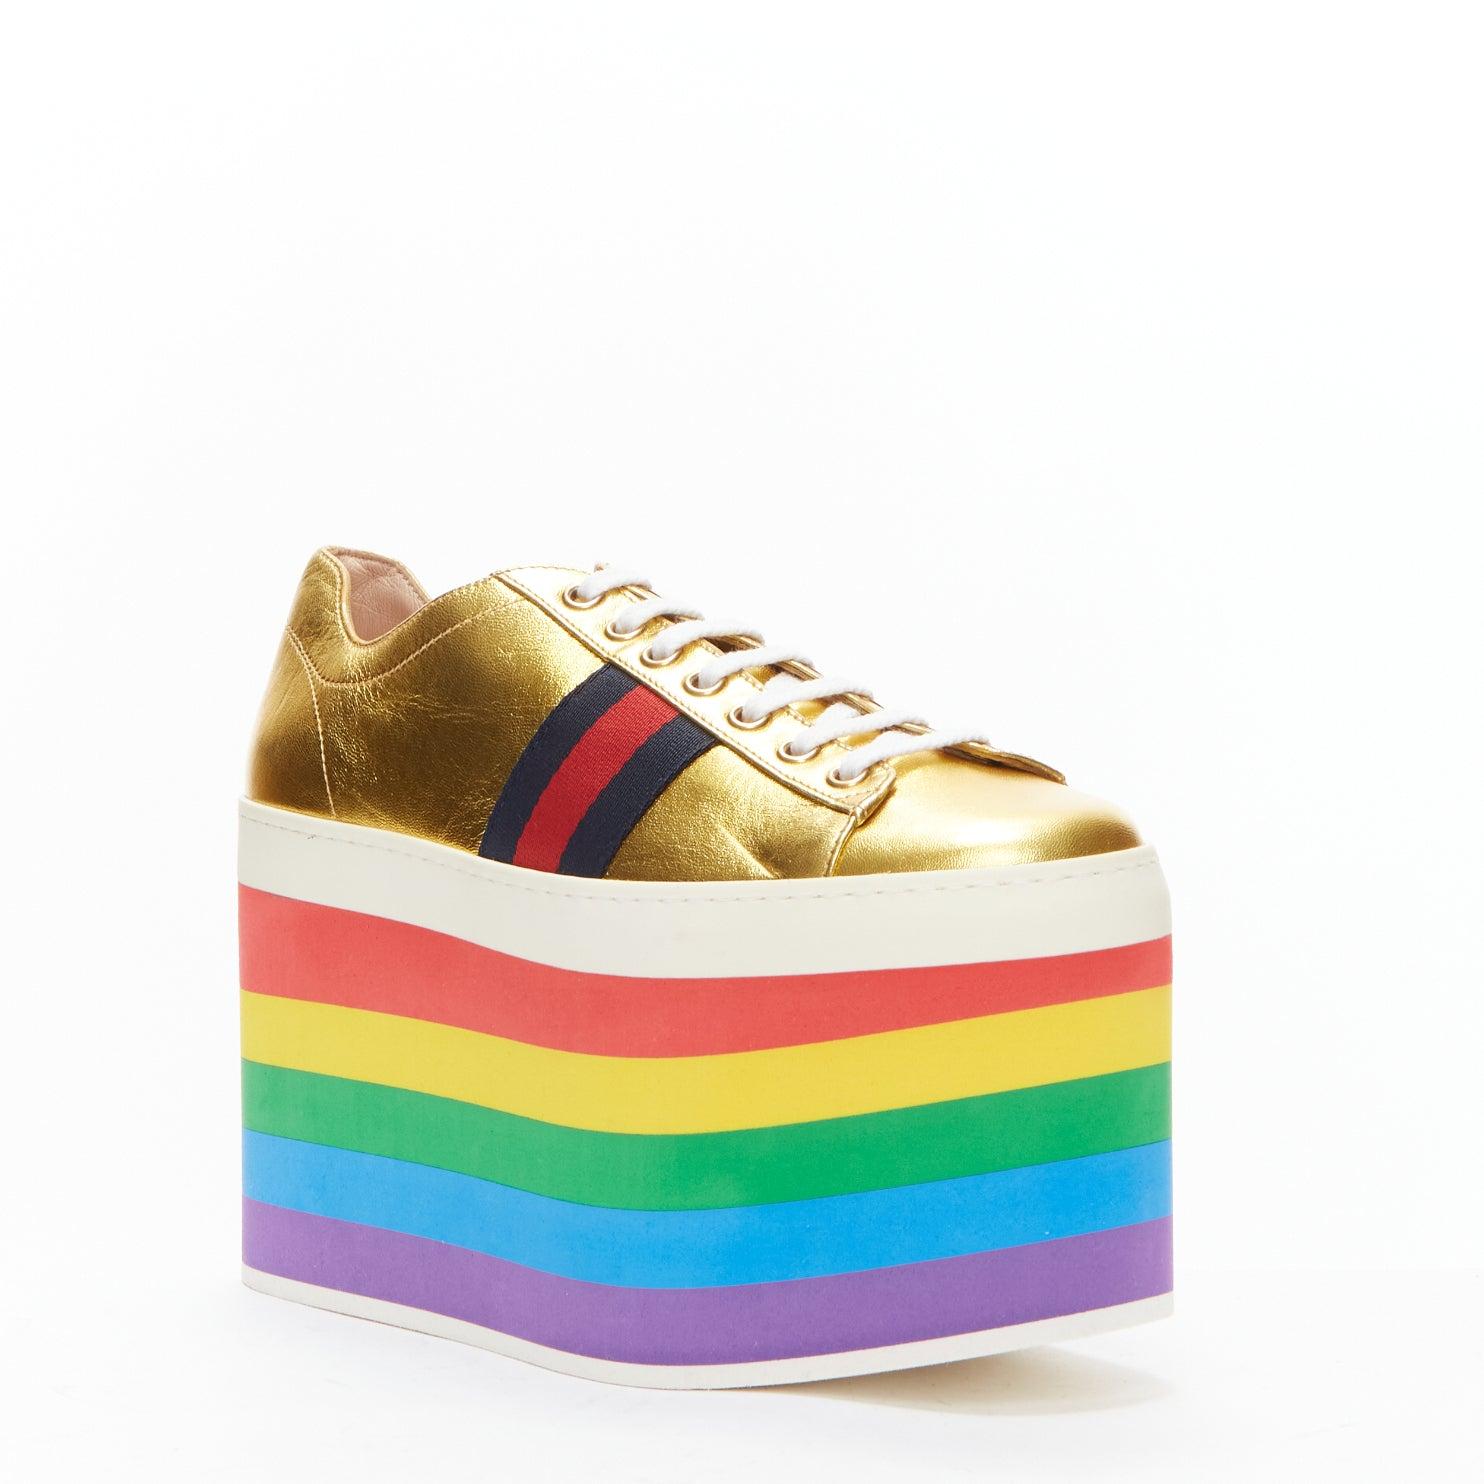 GUCCI Alessandro Michele Peggy rainbow gold web platform sneakers EU37.5
Reference: TGAS/D00627
Brand: Gucci
Designer: Alessandro Michele
Model: Peggy
Material: Leather, Fabric, Foam
Color: Multicolour, Gold
Pattern: Striped
Closure: Lace Up
Lining: